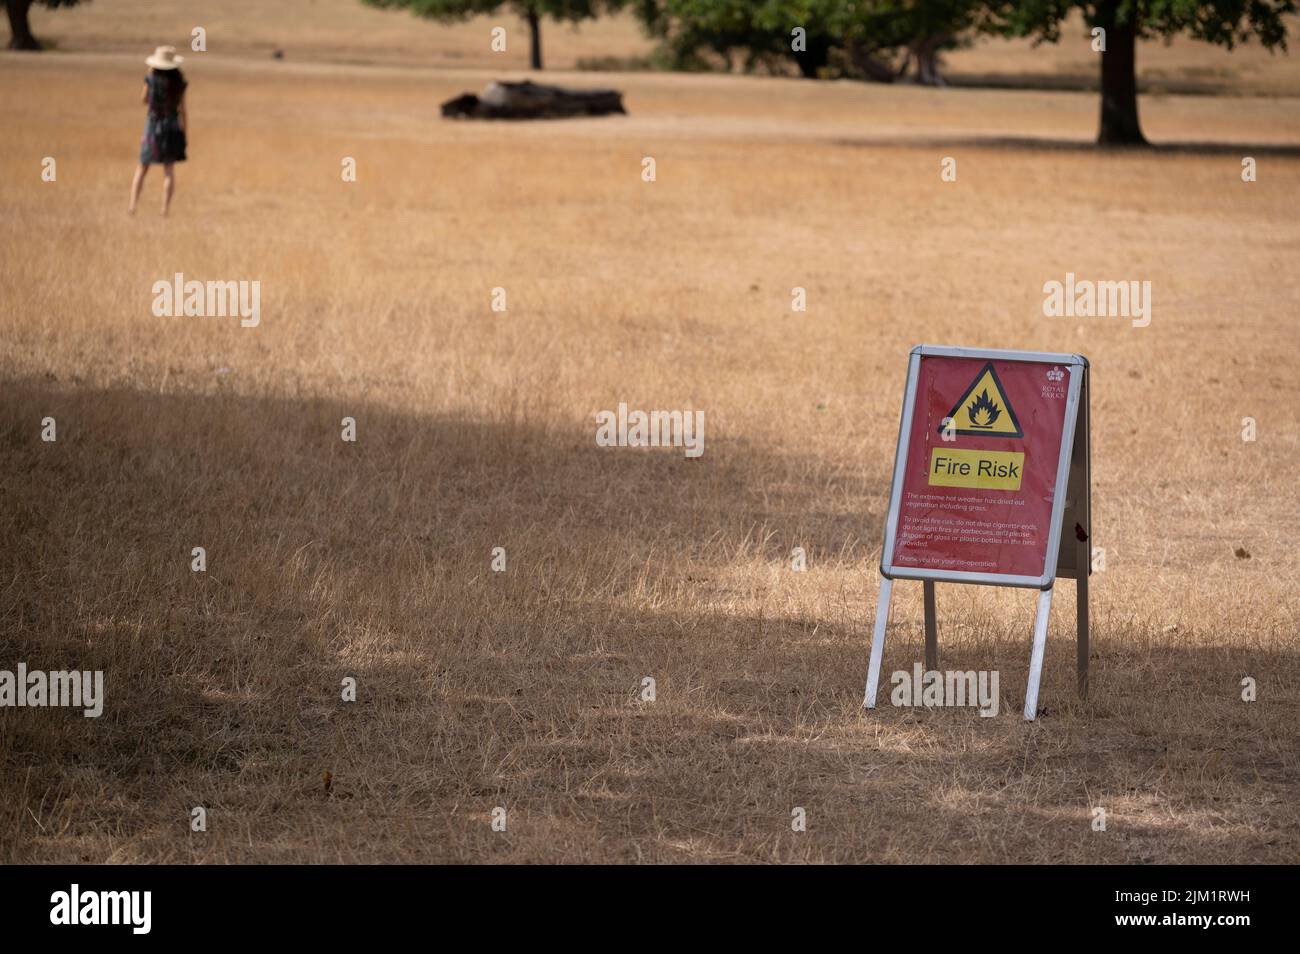 Richmond Park, London, UK. 4 August 2022. Fire risk sign in Richmond Park. Drought conditions continue around London and the South East of England. Grassland in Richmond Park is straw-like after weeks without rain and having endured temperatures of 40 degrees. Hot weather with no rain forecast is currently due to continue in the region till mid August. Credit: Malcolm Park/Alamy Live News Stock Photo